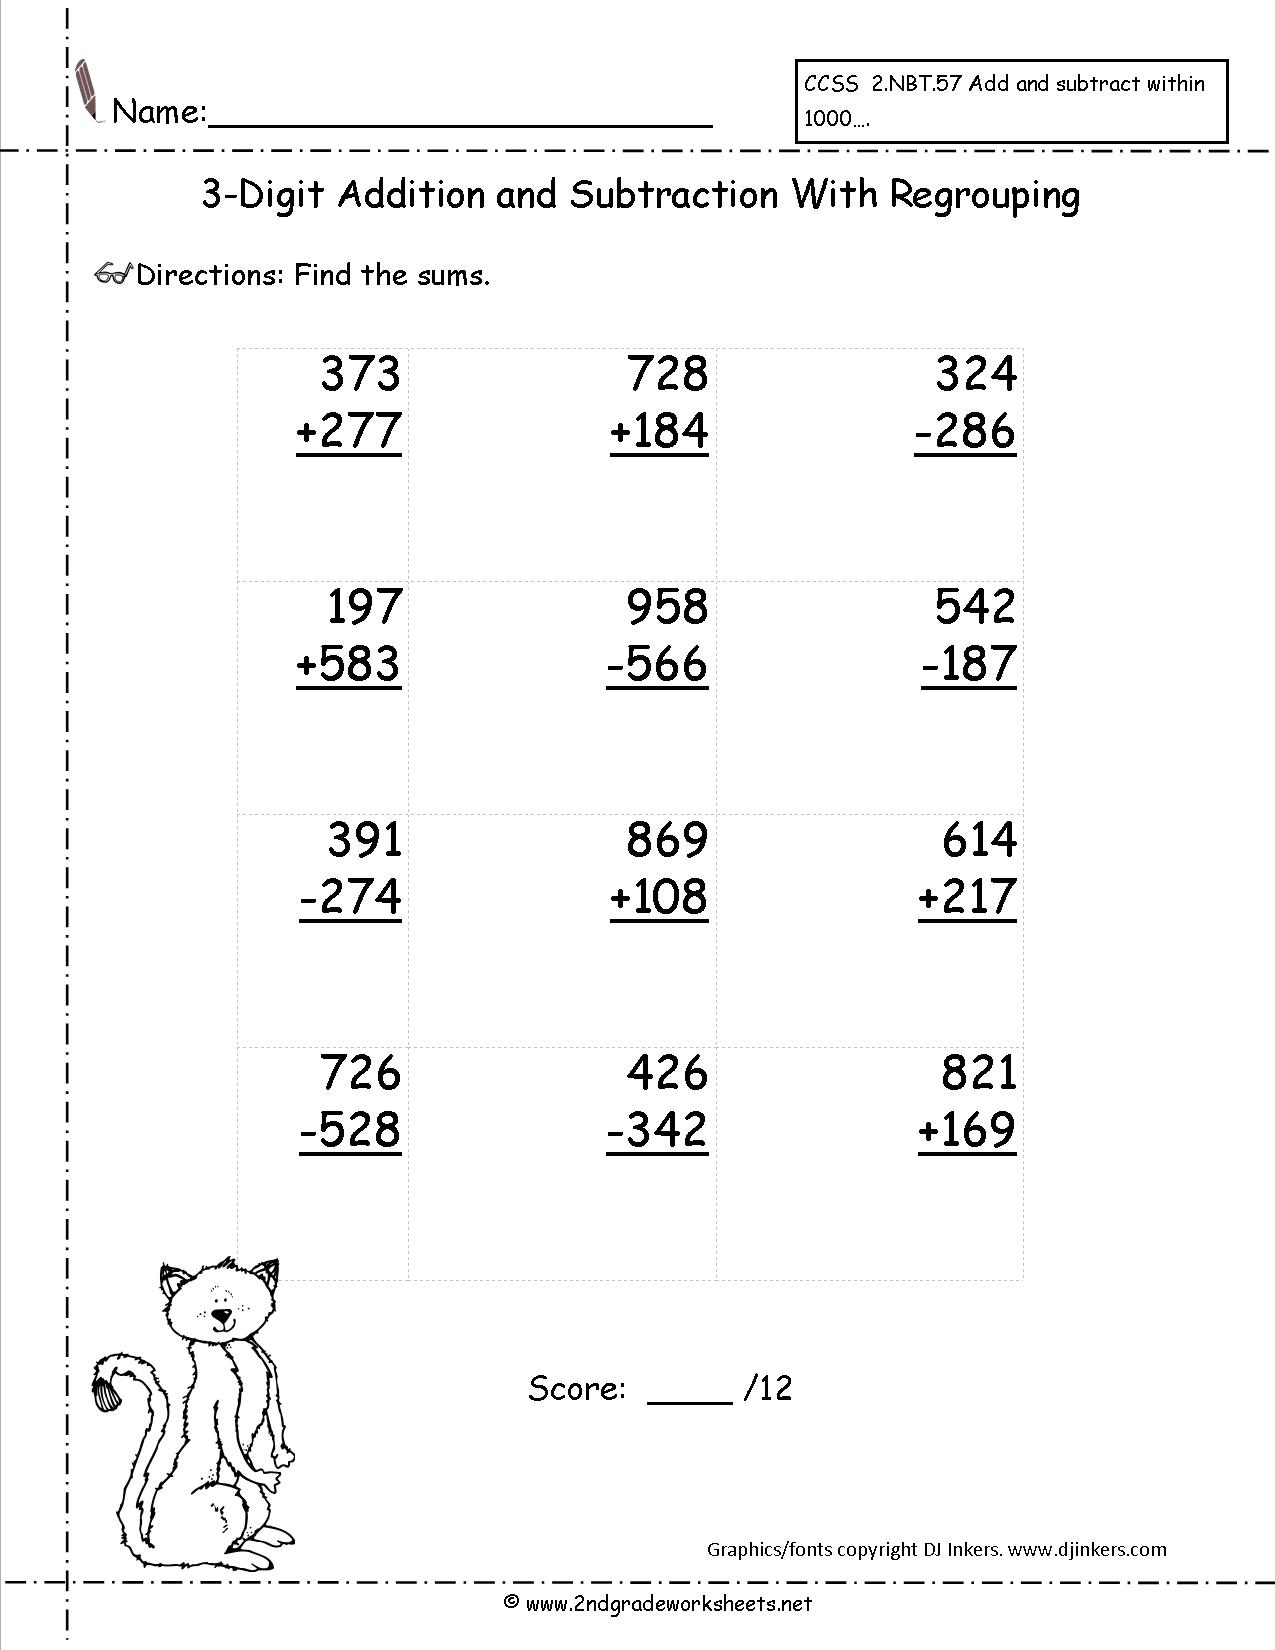 Three Digit Addition And Subtraction Worksheets From The Teacher&amp;#039;s Guide - Free Printable Double Digit Addition And Subtraction Worksheets